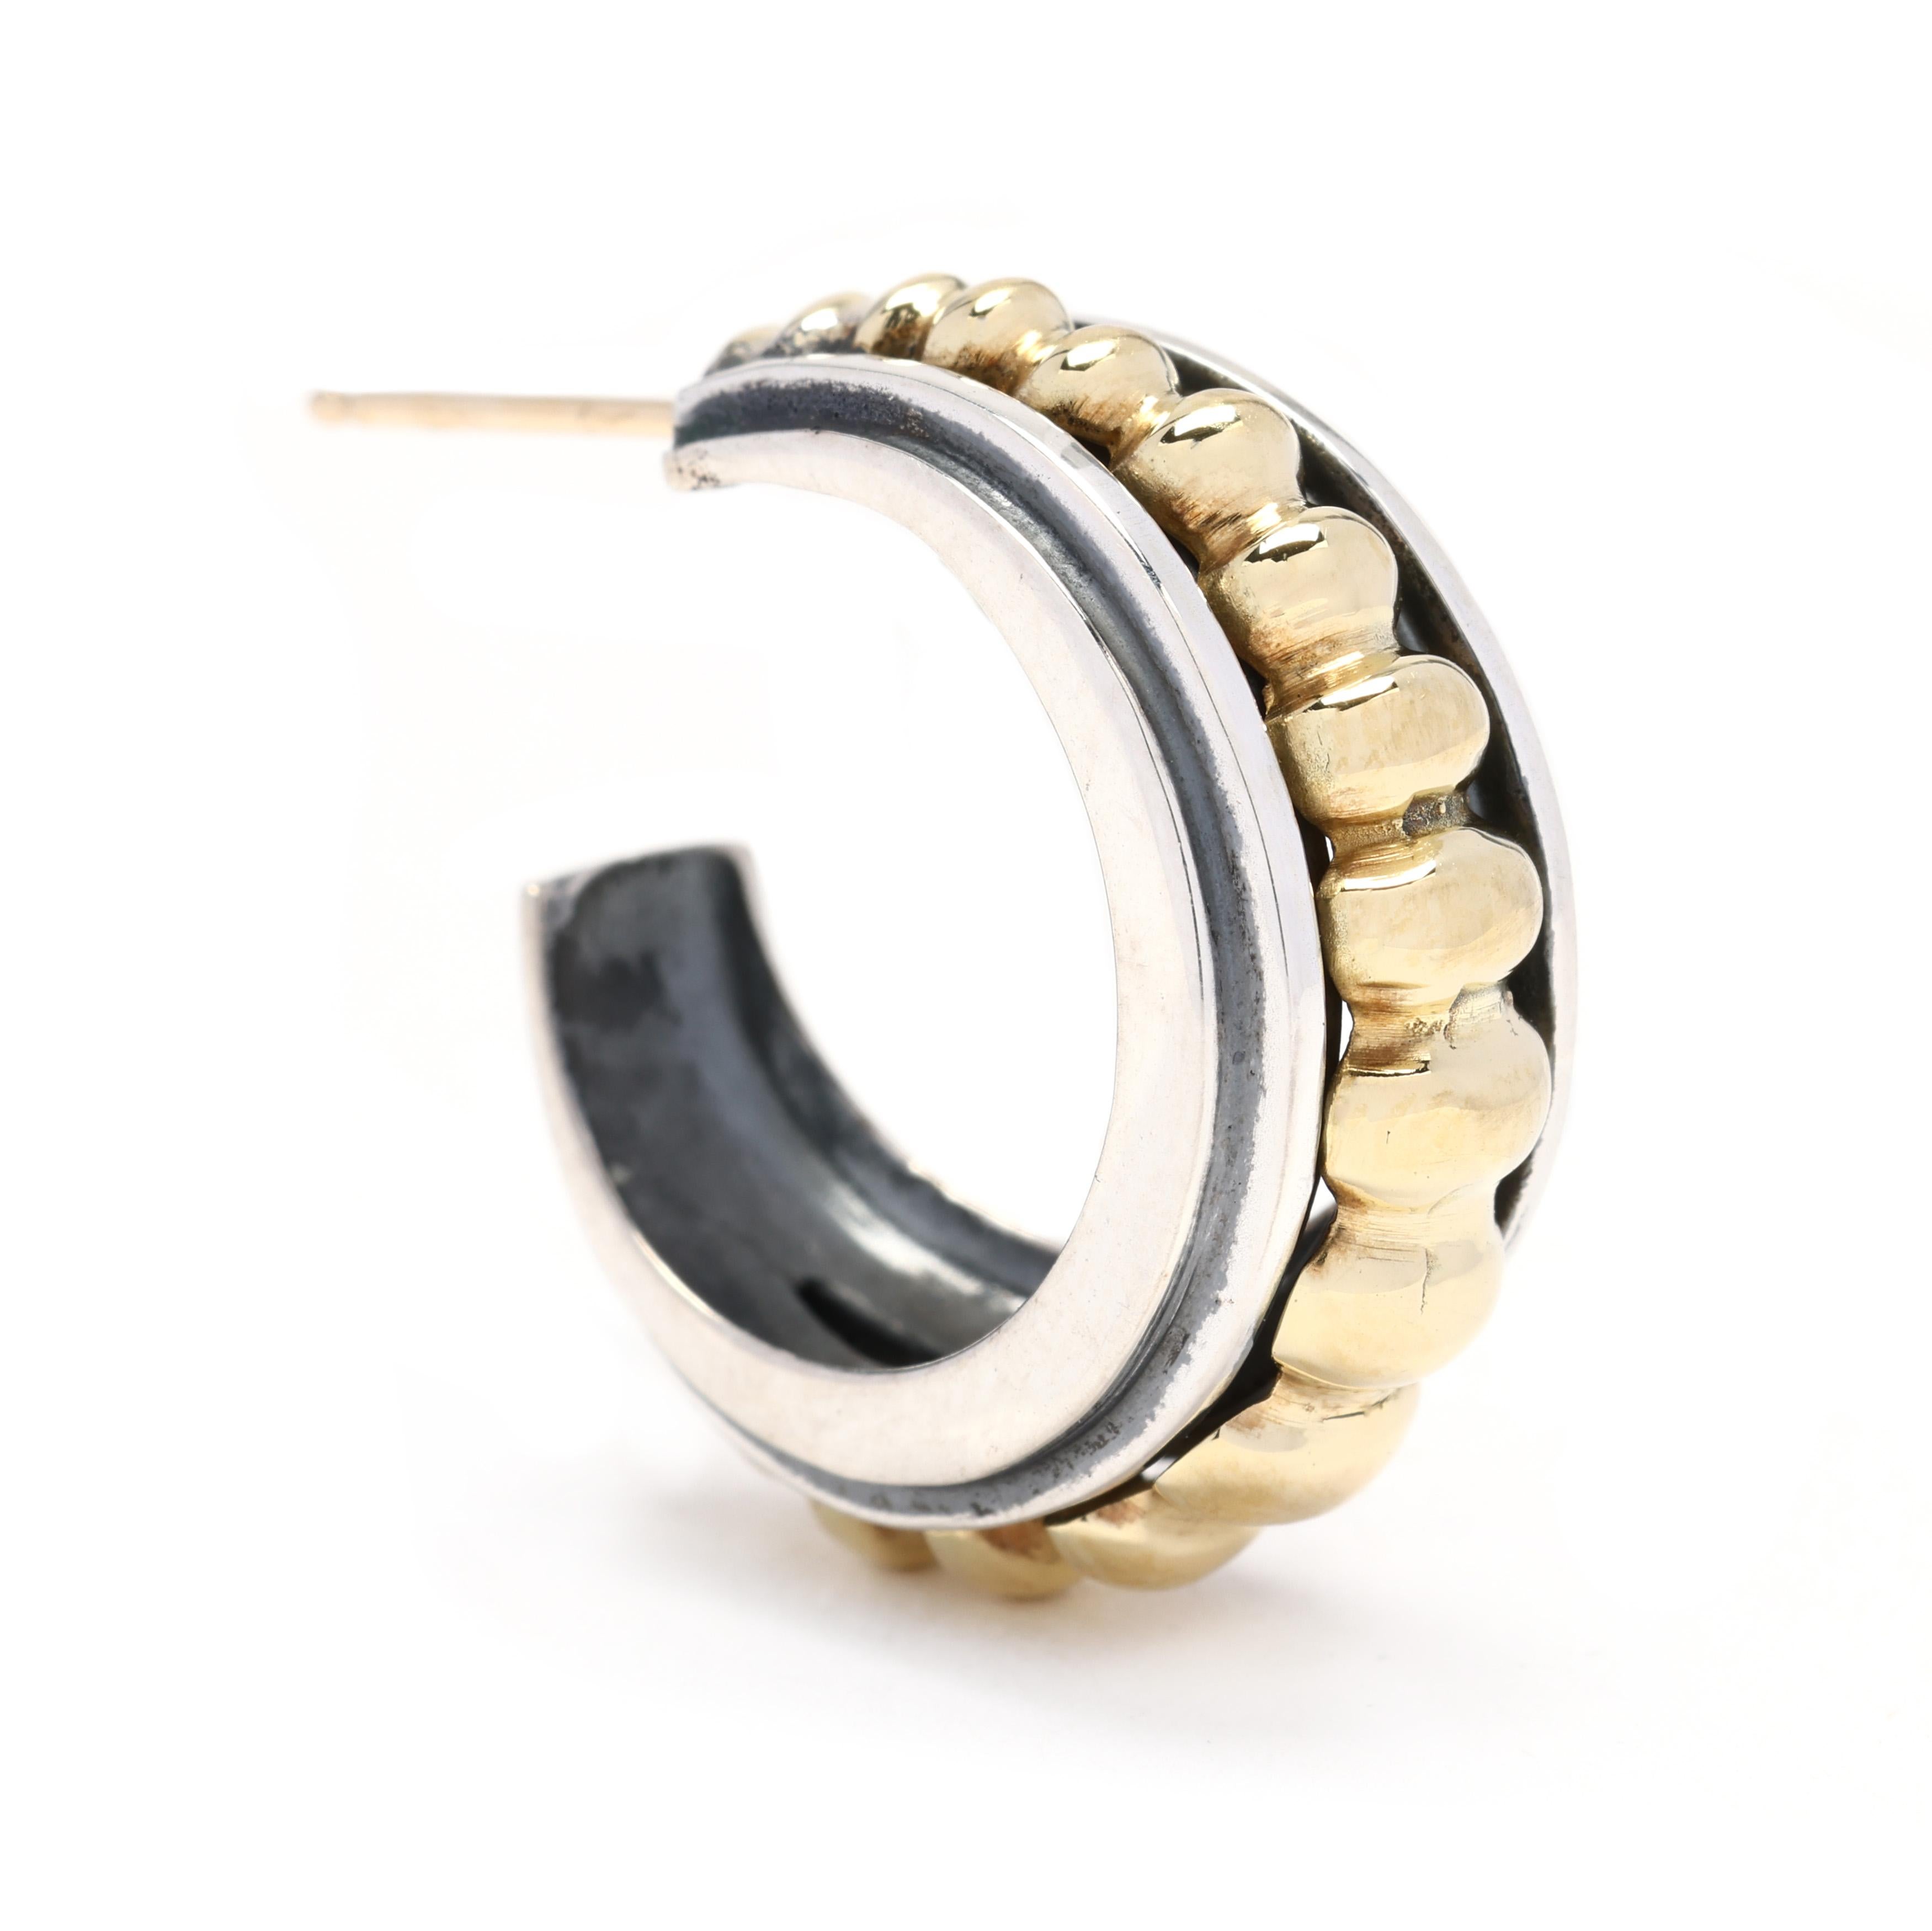 These Lagos Caviar ribbed hoops are a must-have addition to your jewelry collection. Made from sterling silver with an 18k yellow gold accent, these hoops are crafted with a thick and ribbed design that adds a unique and modern twist. The Lagos